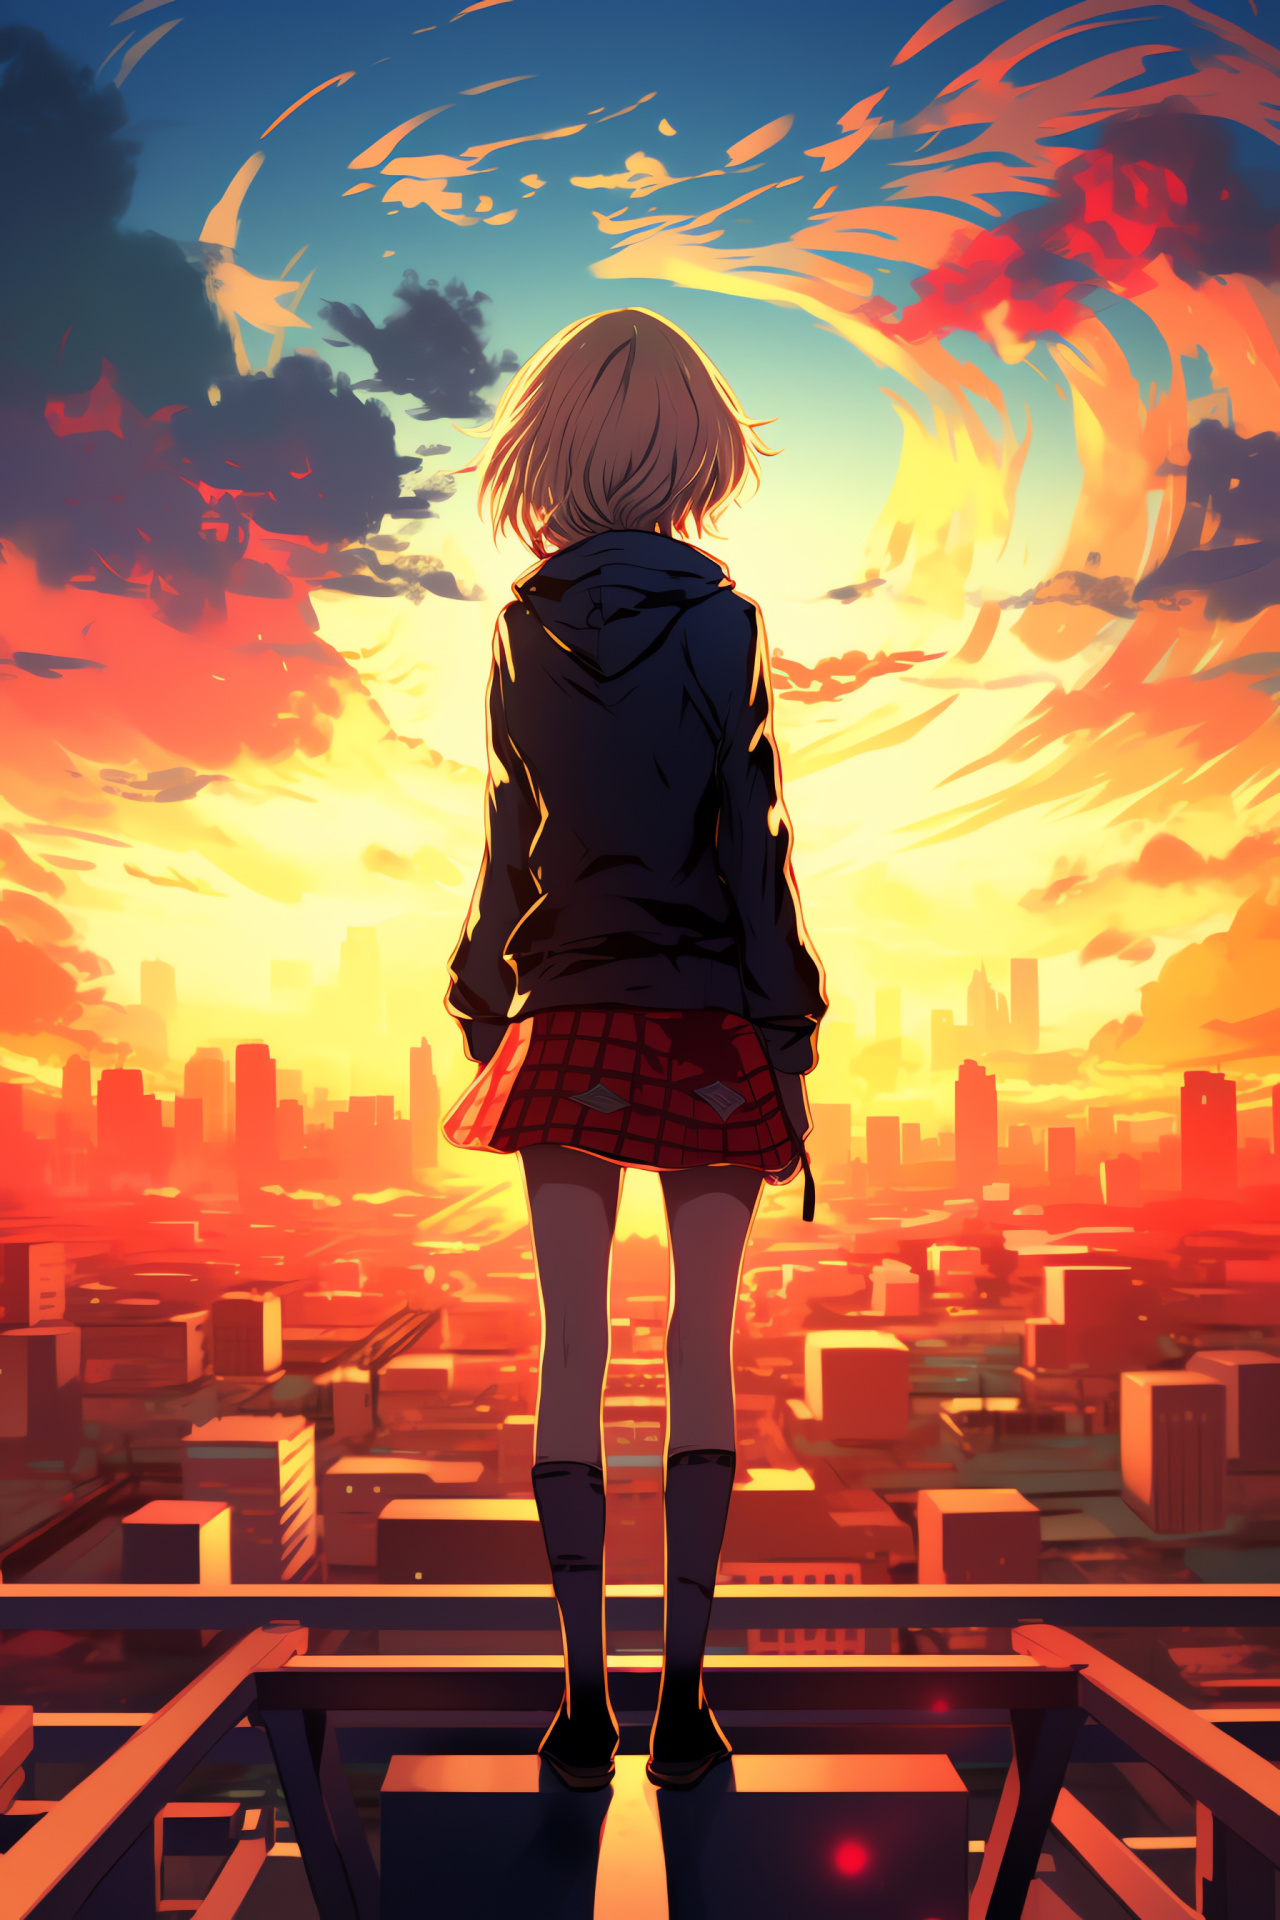 Persona 3 Aigis game, High school rooftop scene, Evening ambiance, Anime graphics, HD Phone Wallpaper